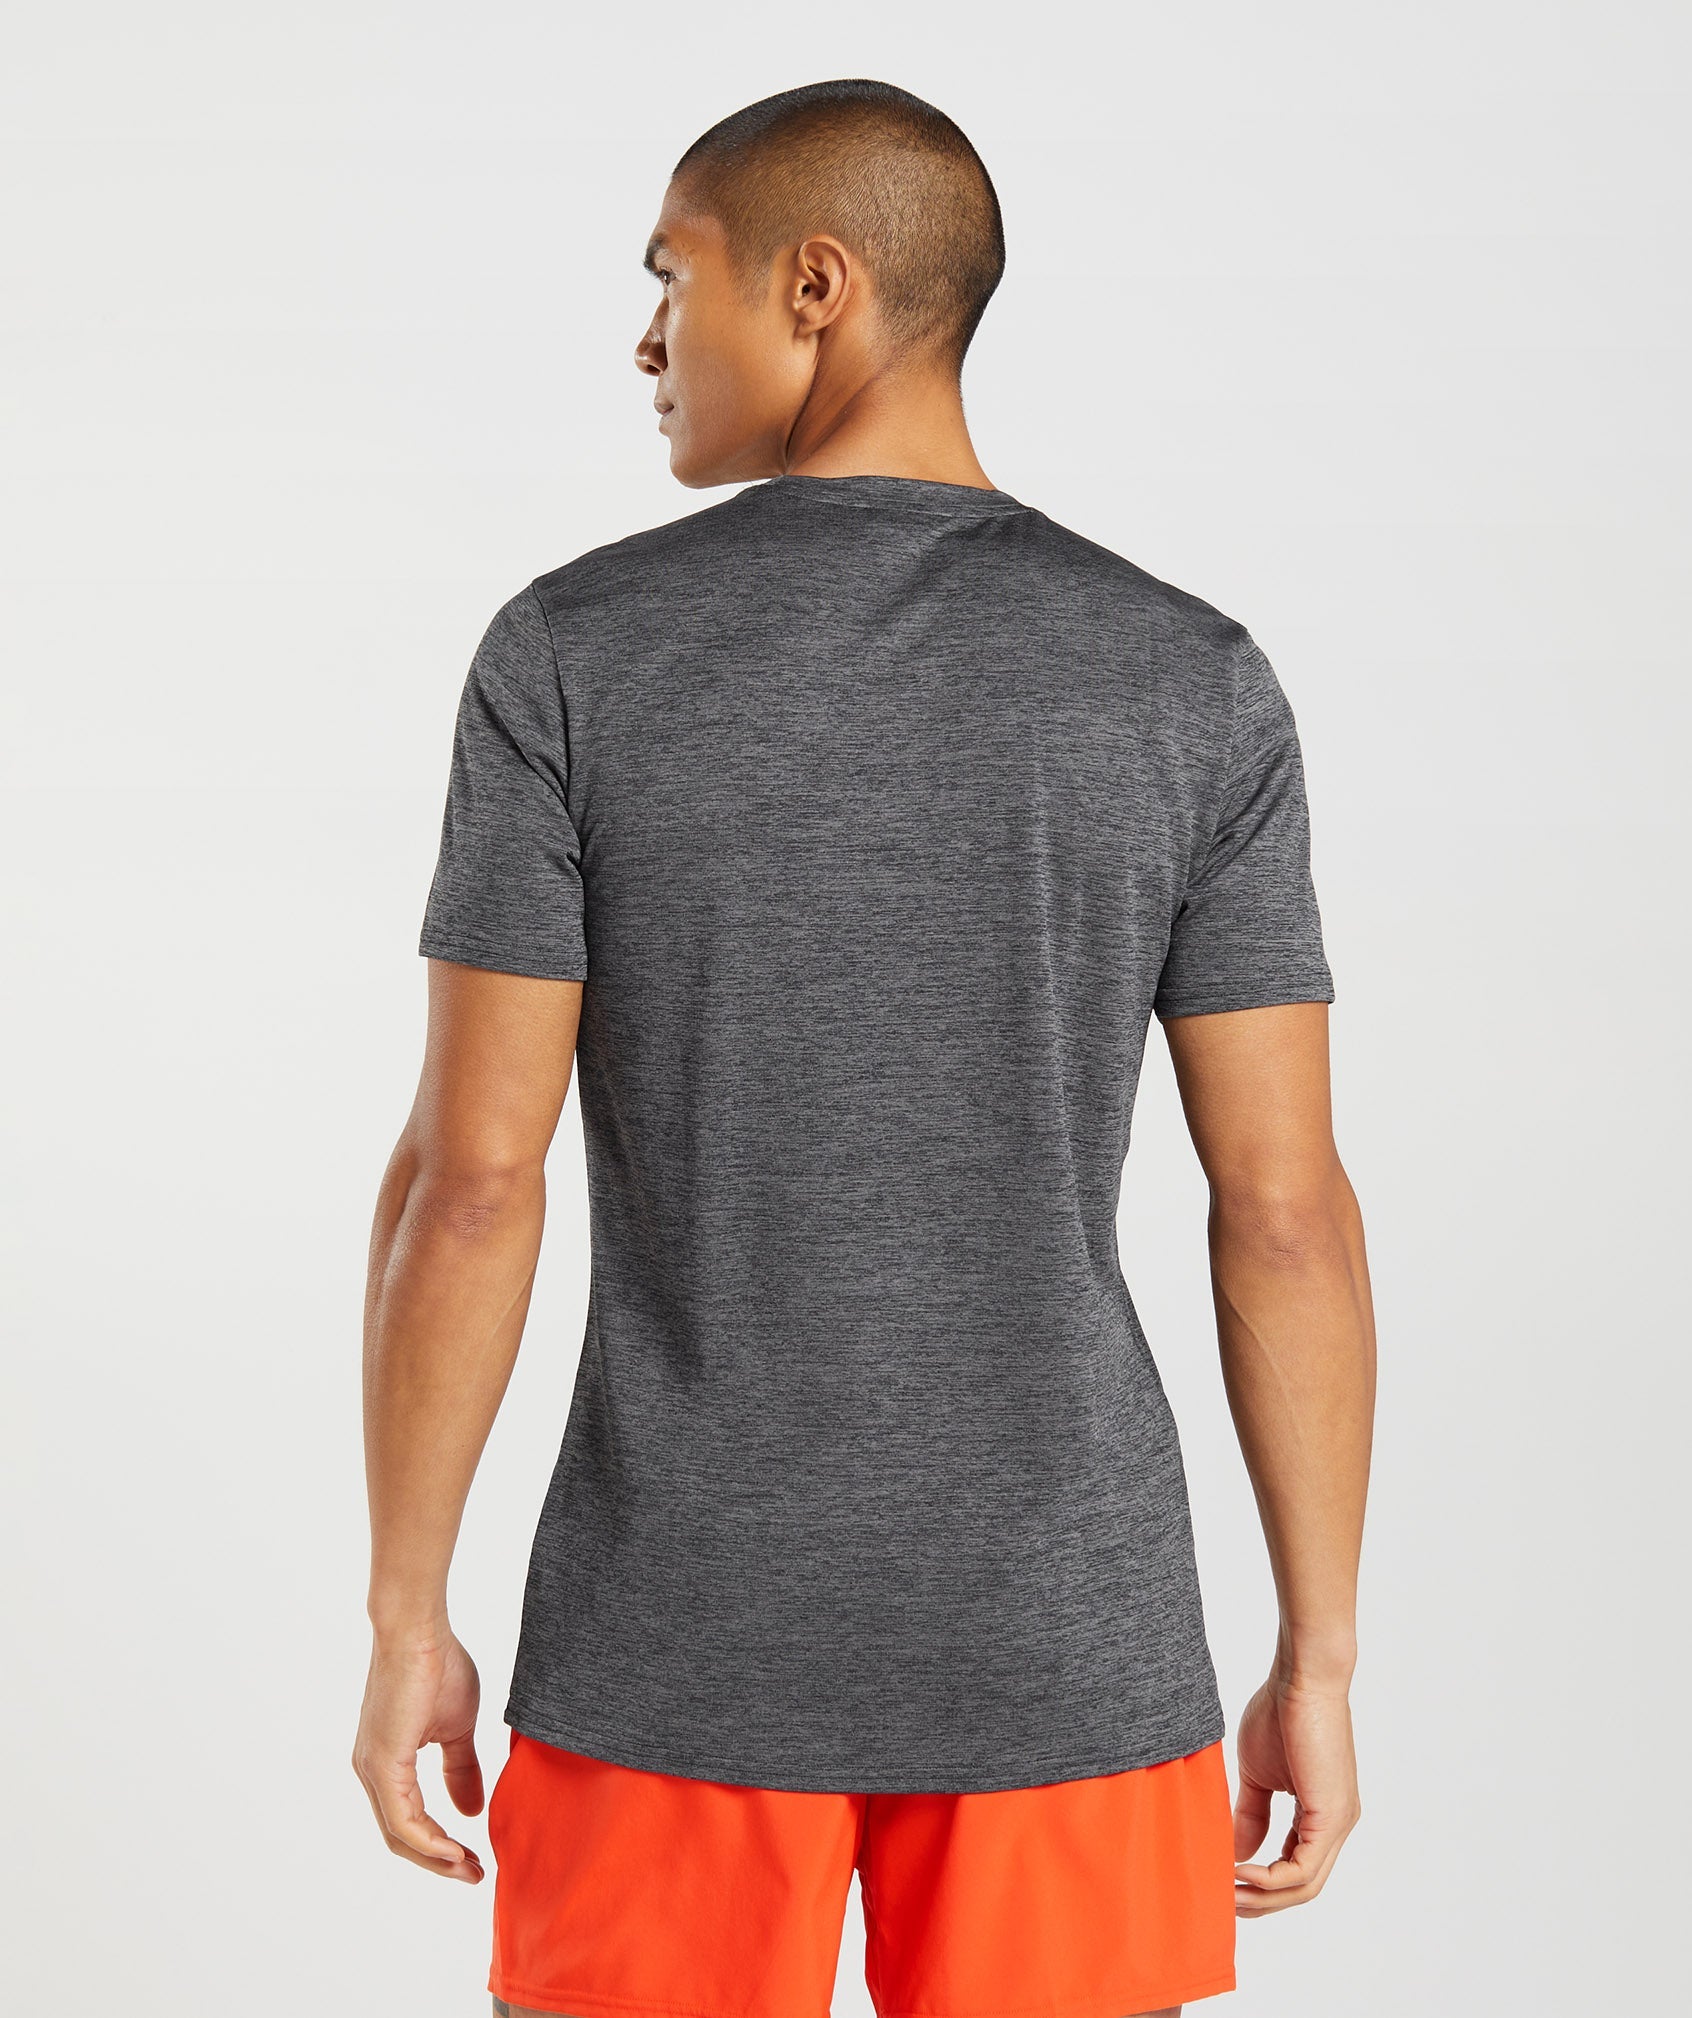 Arrival Marl T-Shirt in Black/Silhouette Grey Marl - view 2